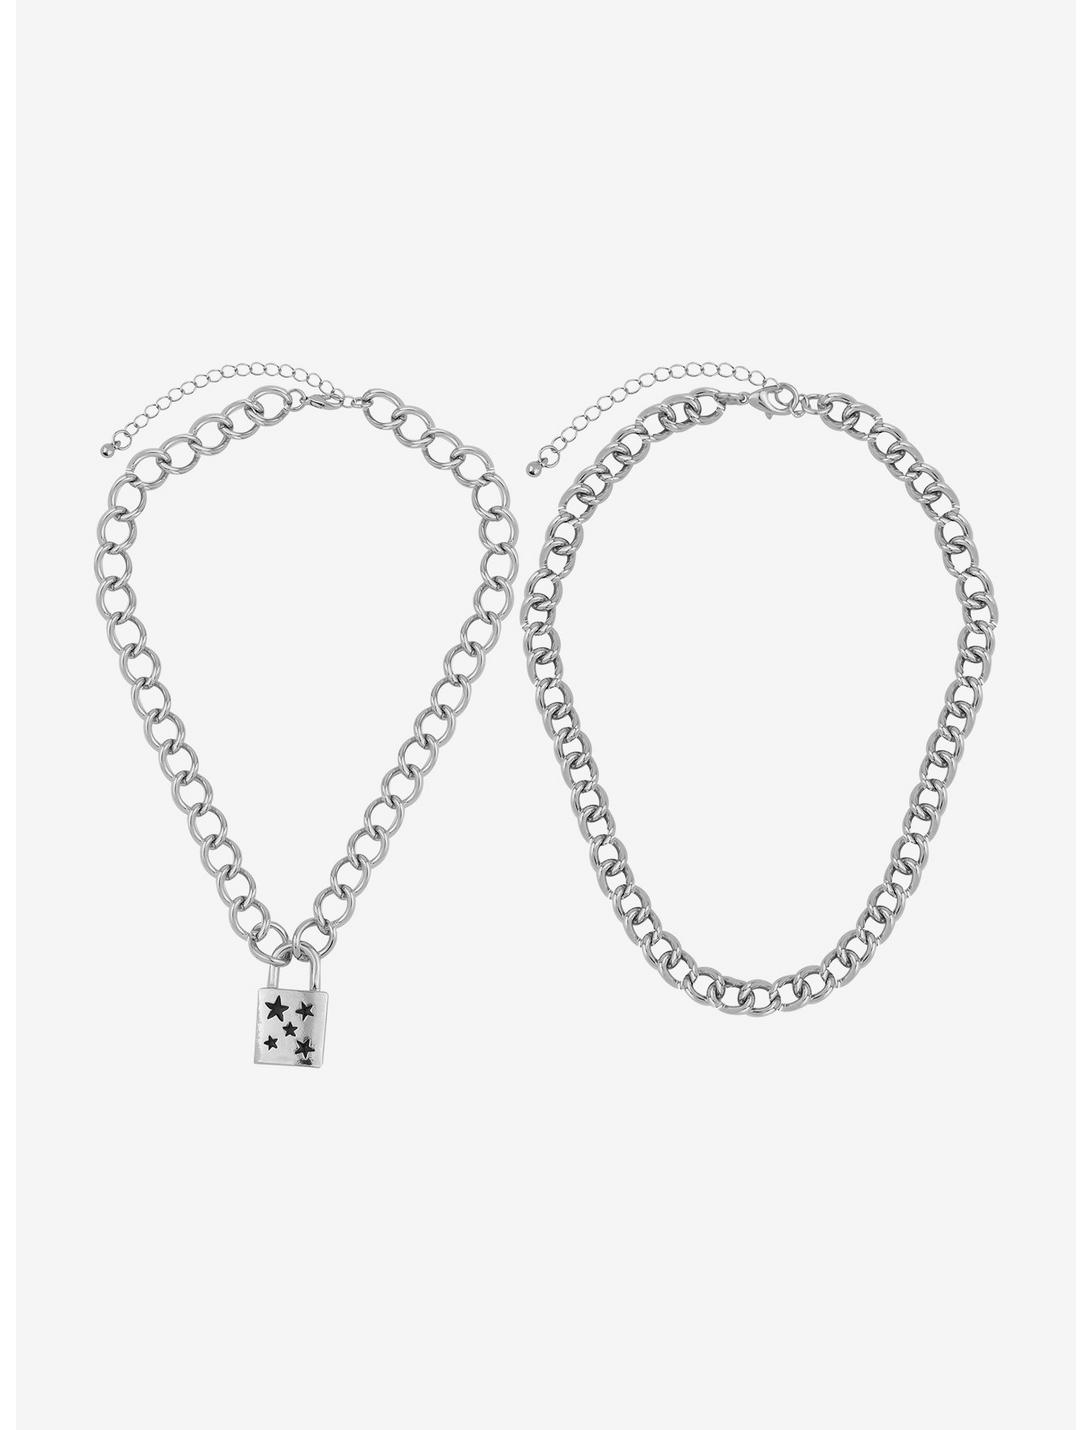 Social Collision Star Padlock Chunky Chain Necklace Set, , hi-res